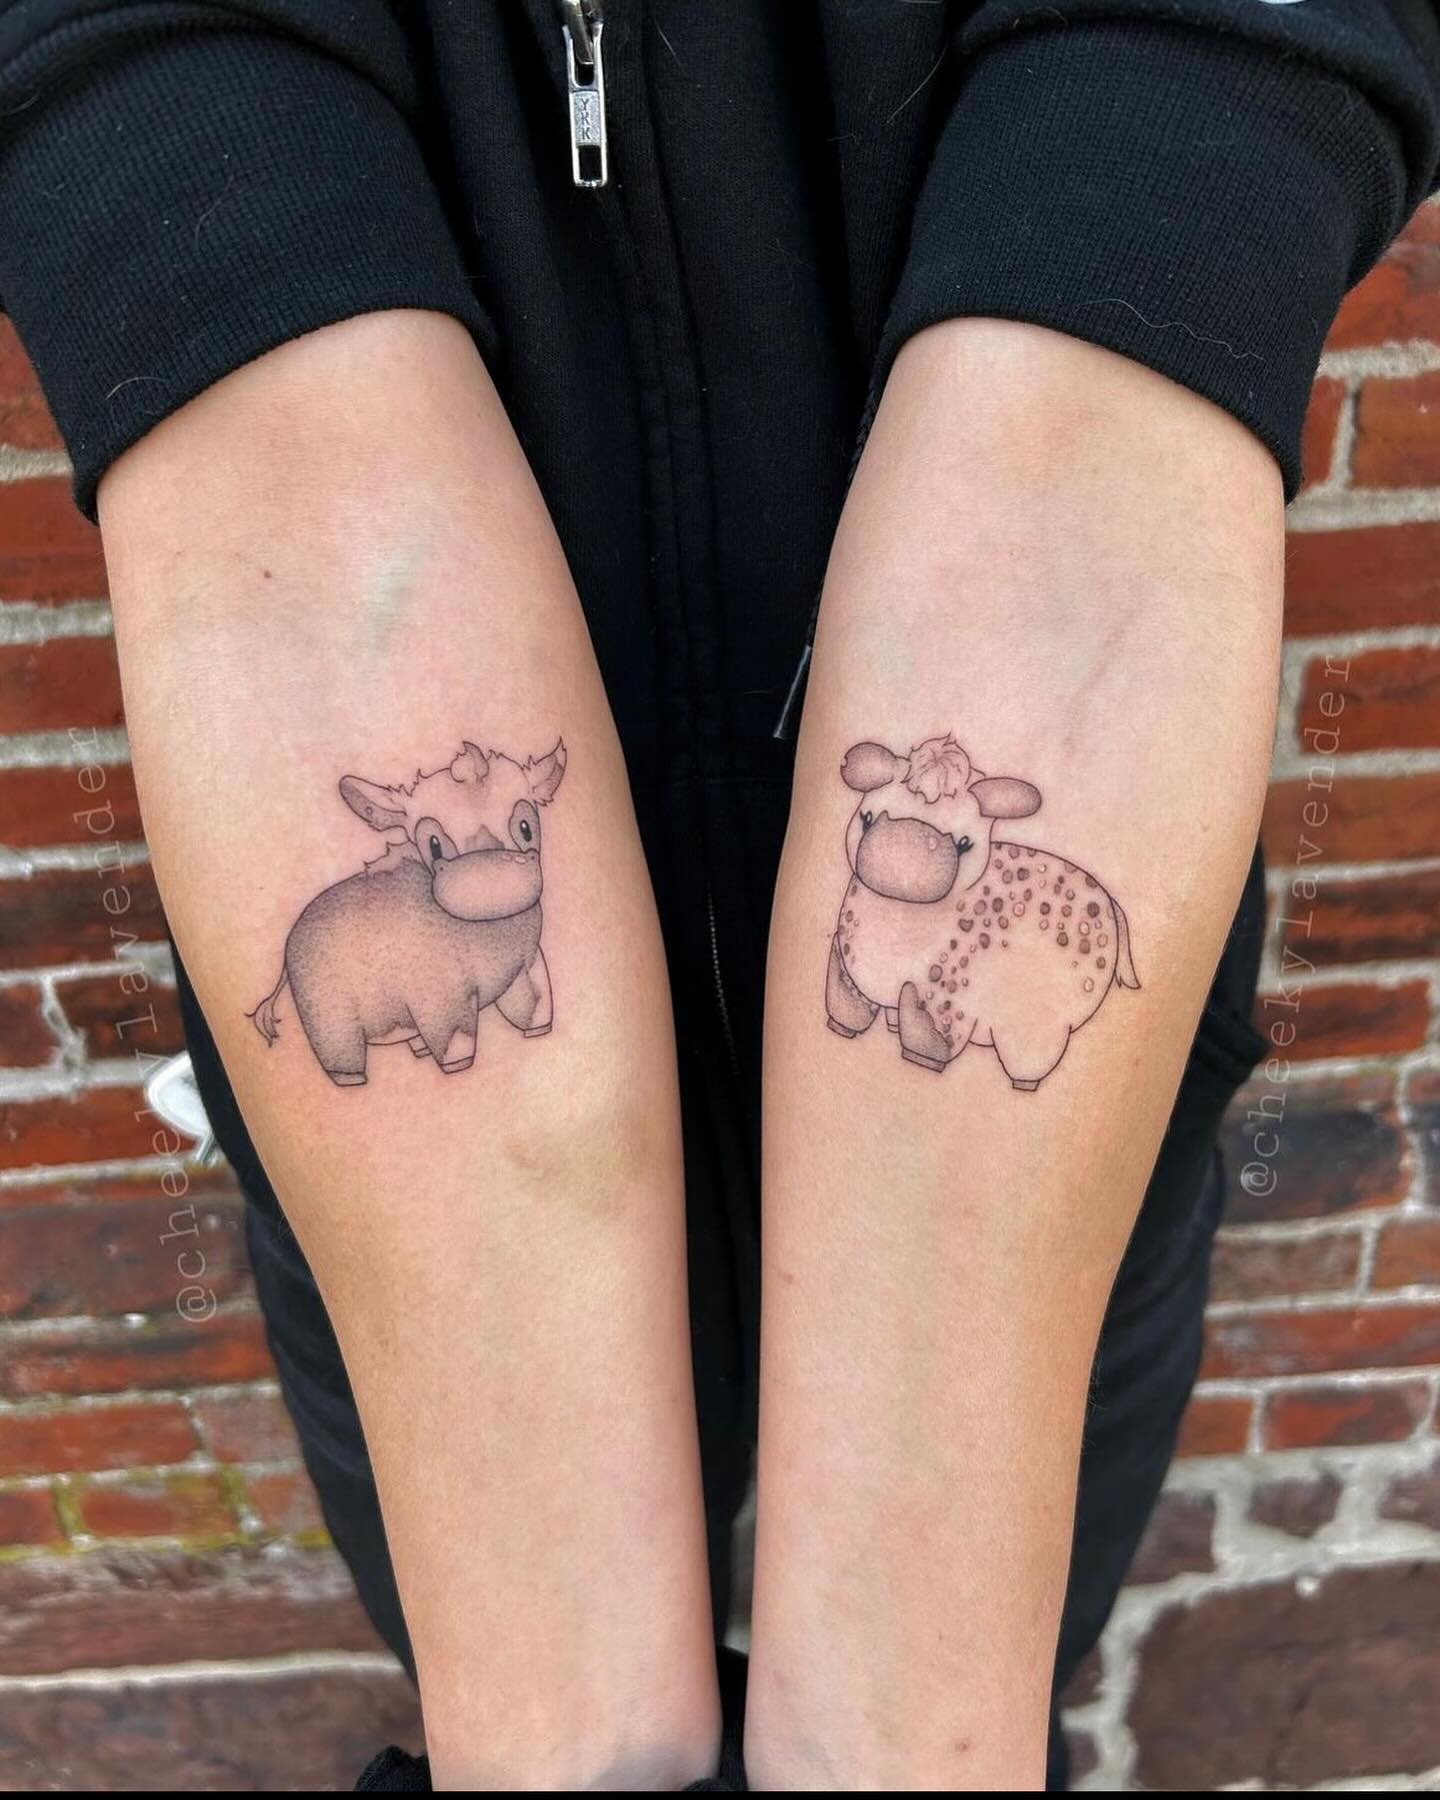 ✨How cute are these little cows 🐮 done by @cheekylavender ✨ 

Katie is now booking for the spring! Message her directly or give thirdseasontattoo.com a visit and book an appointment today!! 

#tattoo #tattoos #cowtattoo #delicatetattoo #delicatetatt